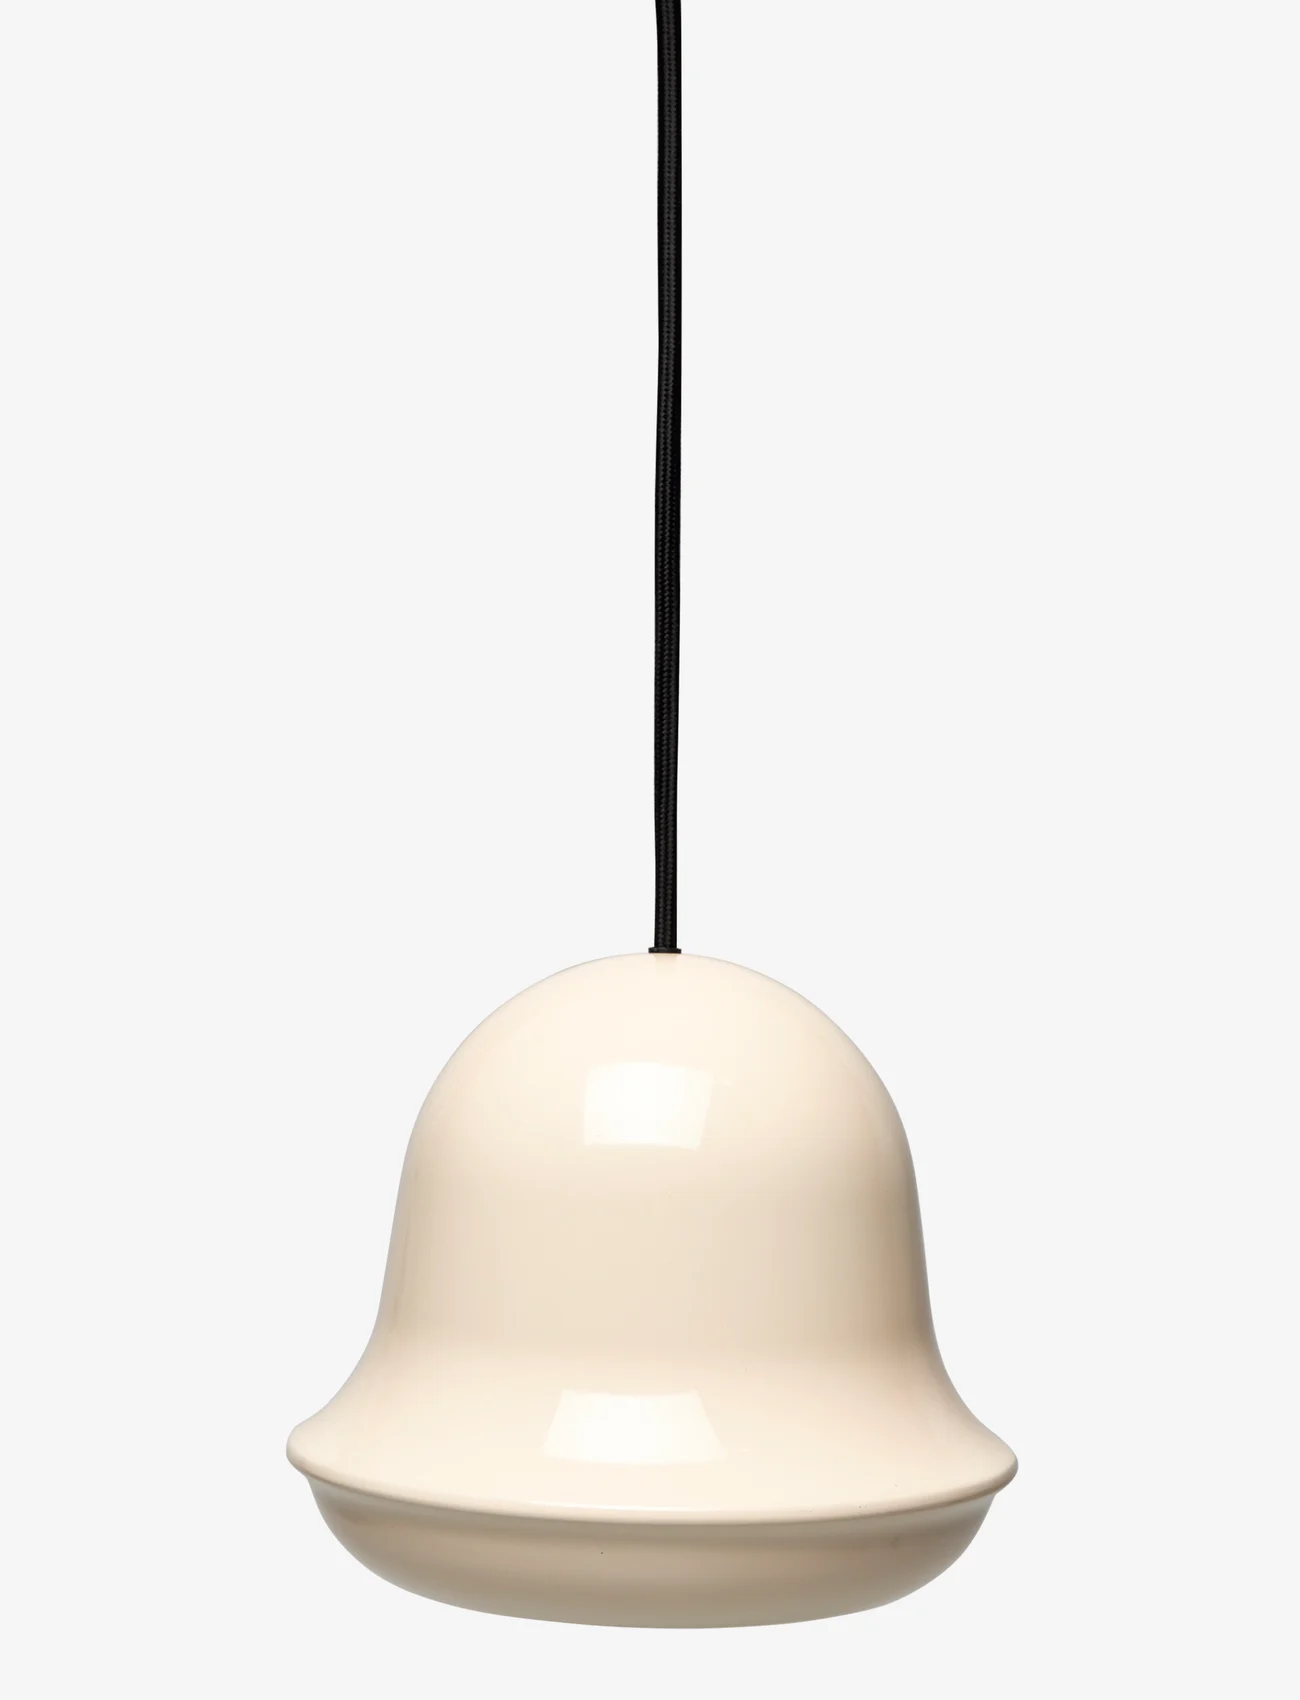 humble LIVING - Bell Pendant - ceiling lights - glossy beige - 0